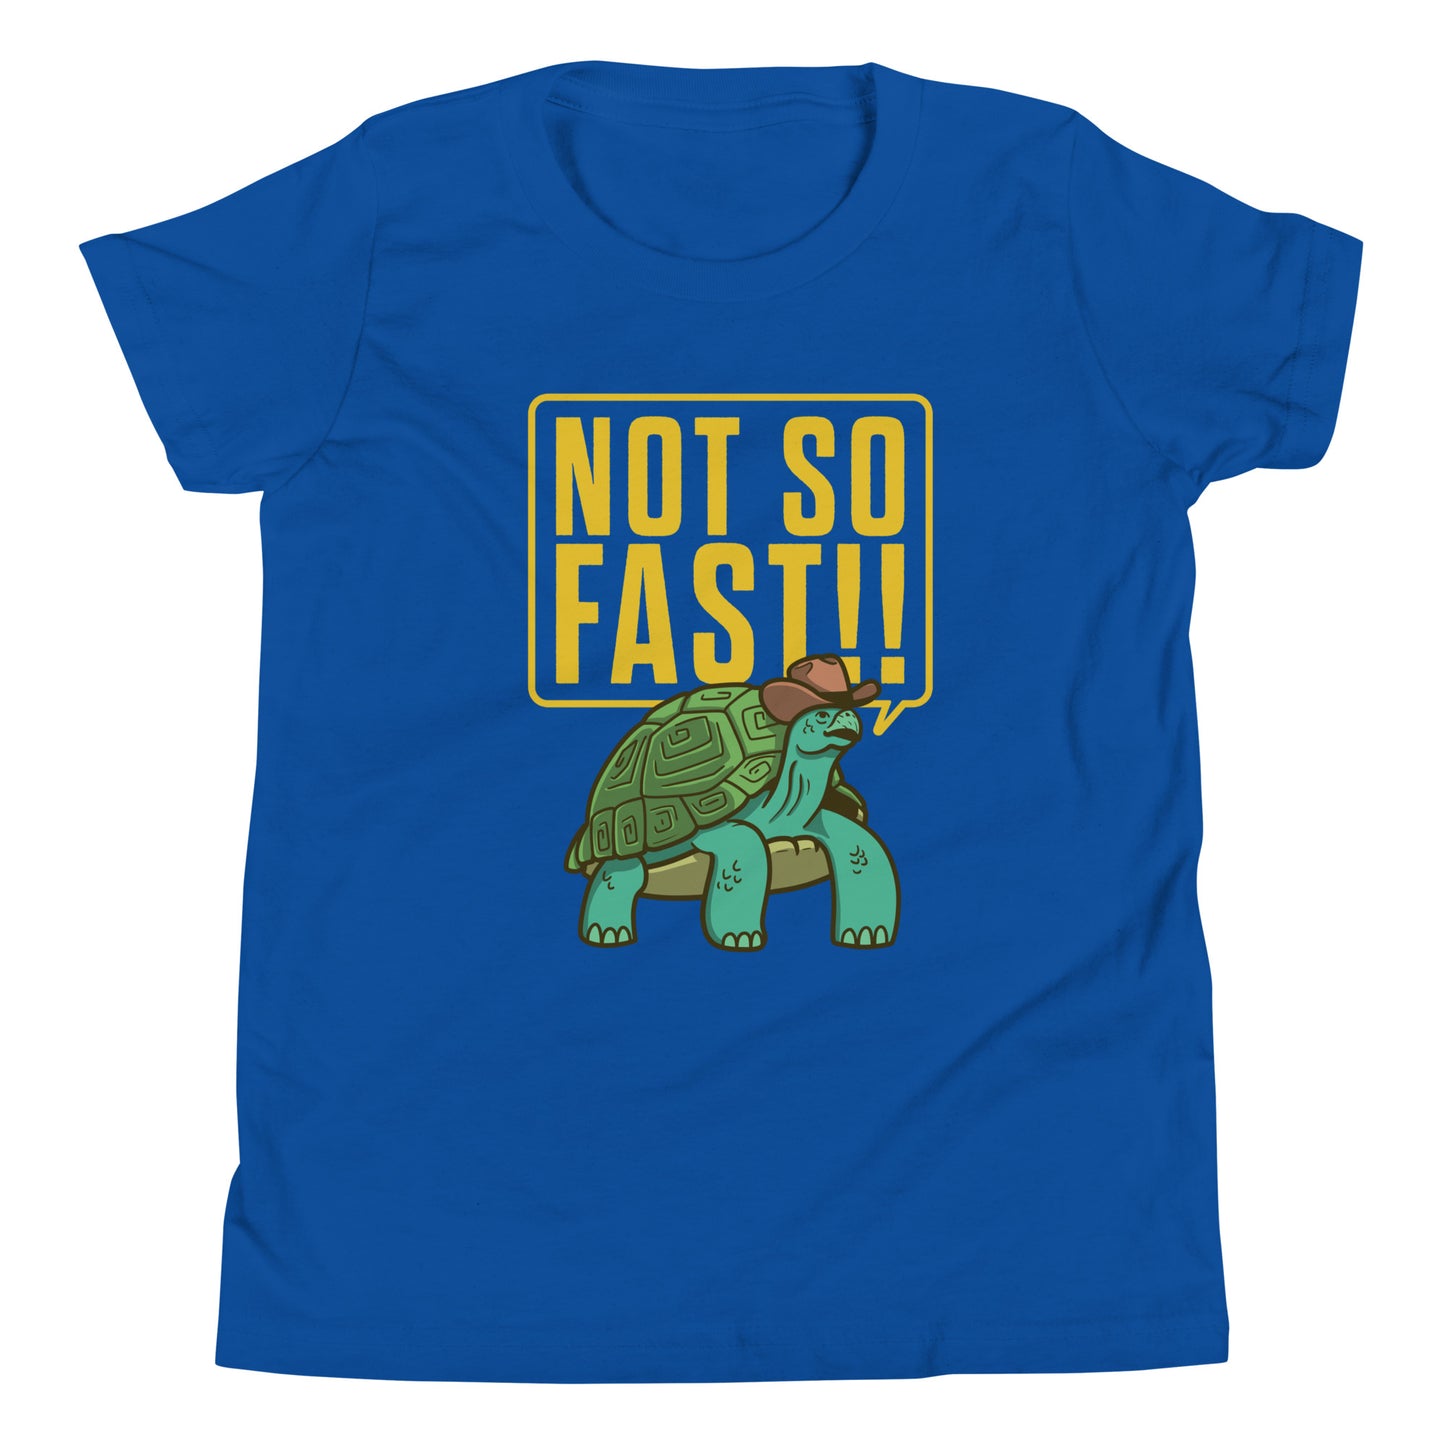 Not So Fast!! Kid's Youth Tee